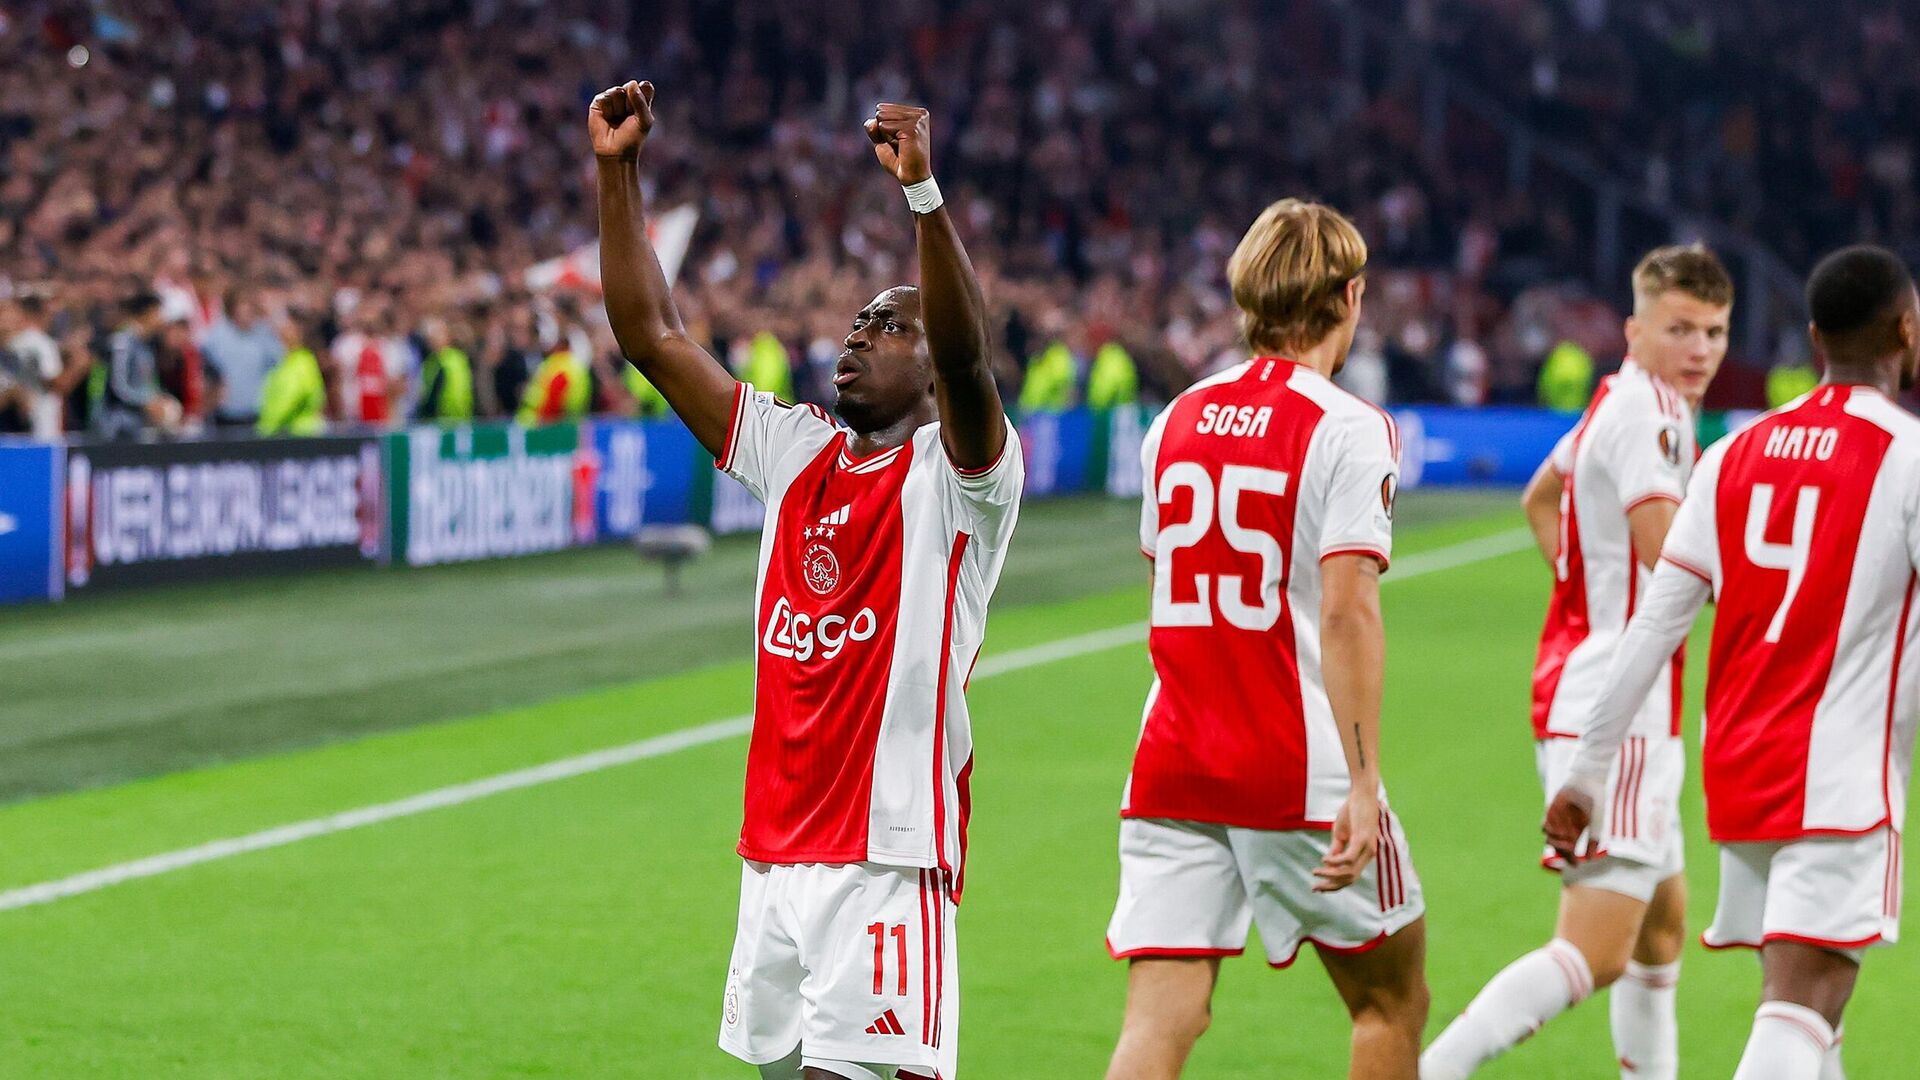 Ajax drew with Marseille in the Europa League match